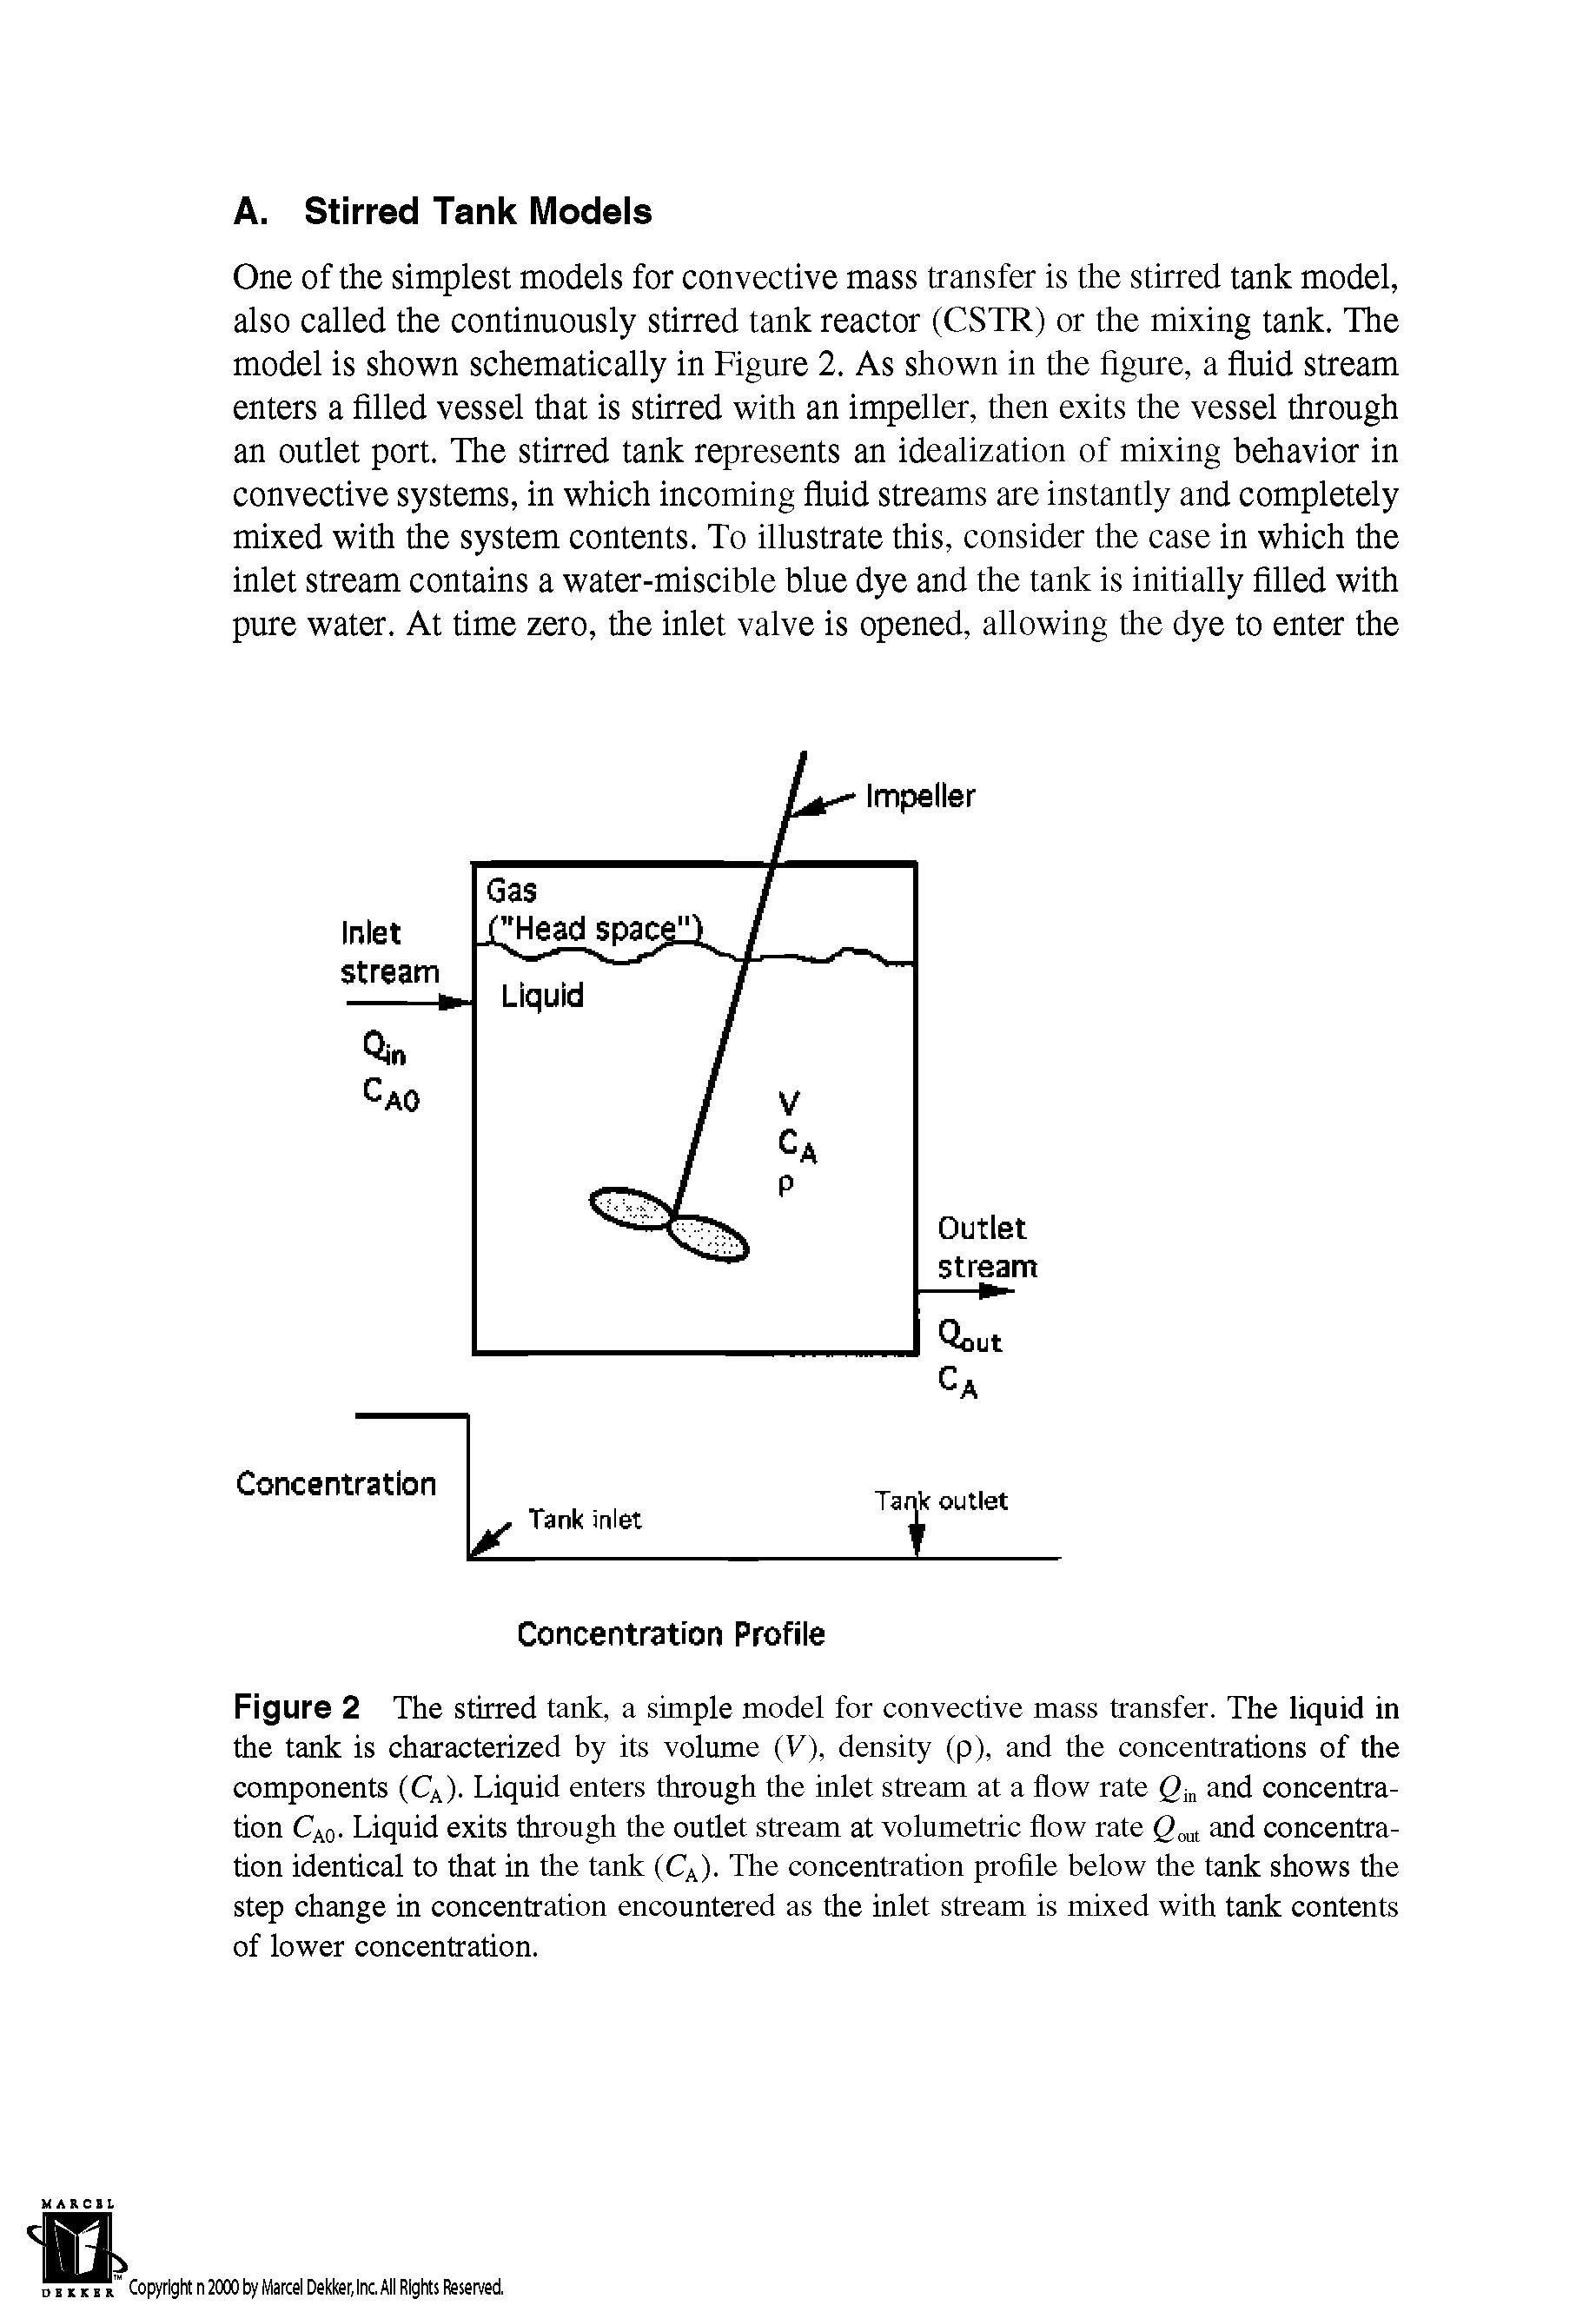 Figure 2 The stirred tank, a simple model for convective mass transfer. The liquid in the tank is characterized by its volume (V), density (p), and the concentrations of the components (CA). Liquid enters through the inlet stream at a flow rate Qm and concentration CA0. Liquid exits through the outlet stream at volumetric flow rate Qml and concentration identical to that in the tank (CA). The concentration profile below the tank shows the step change in concentration encountered as the inlet stream is mixed with tank contents of lower concentration.